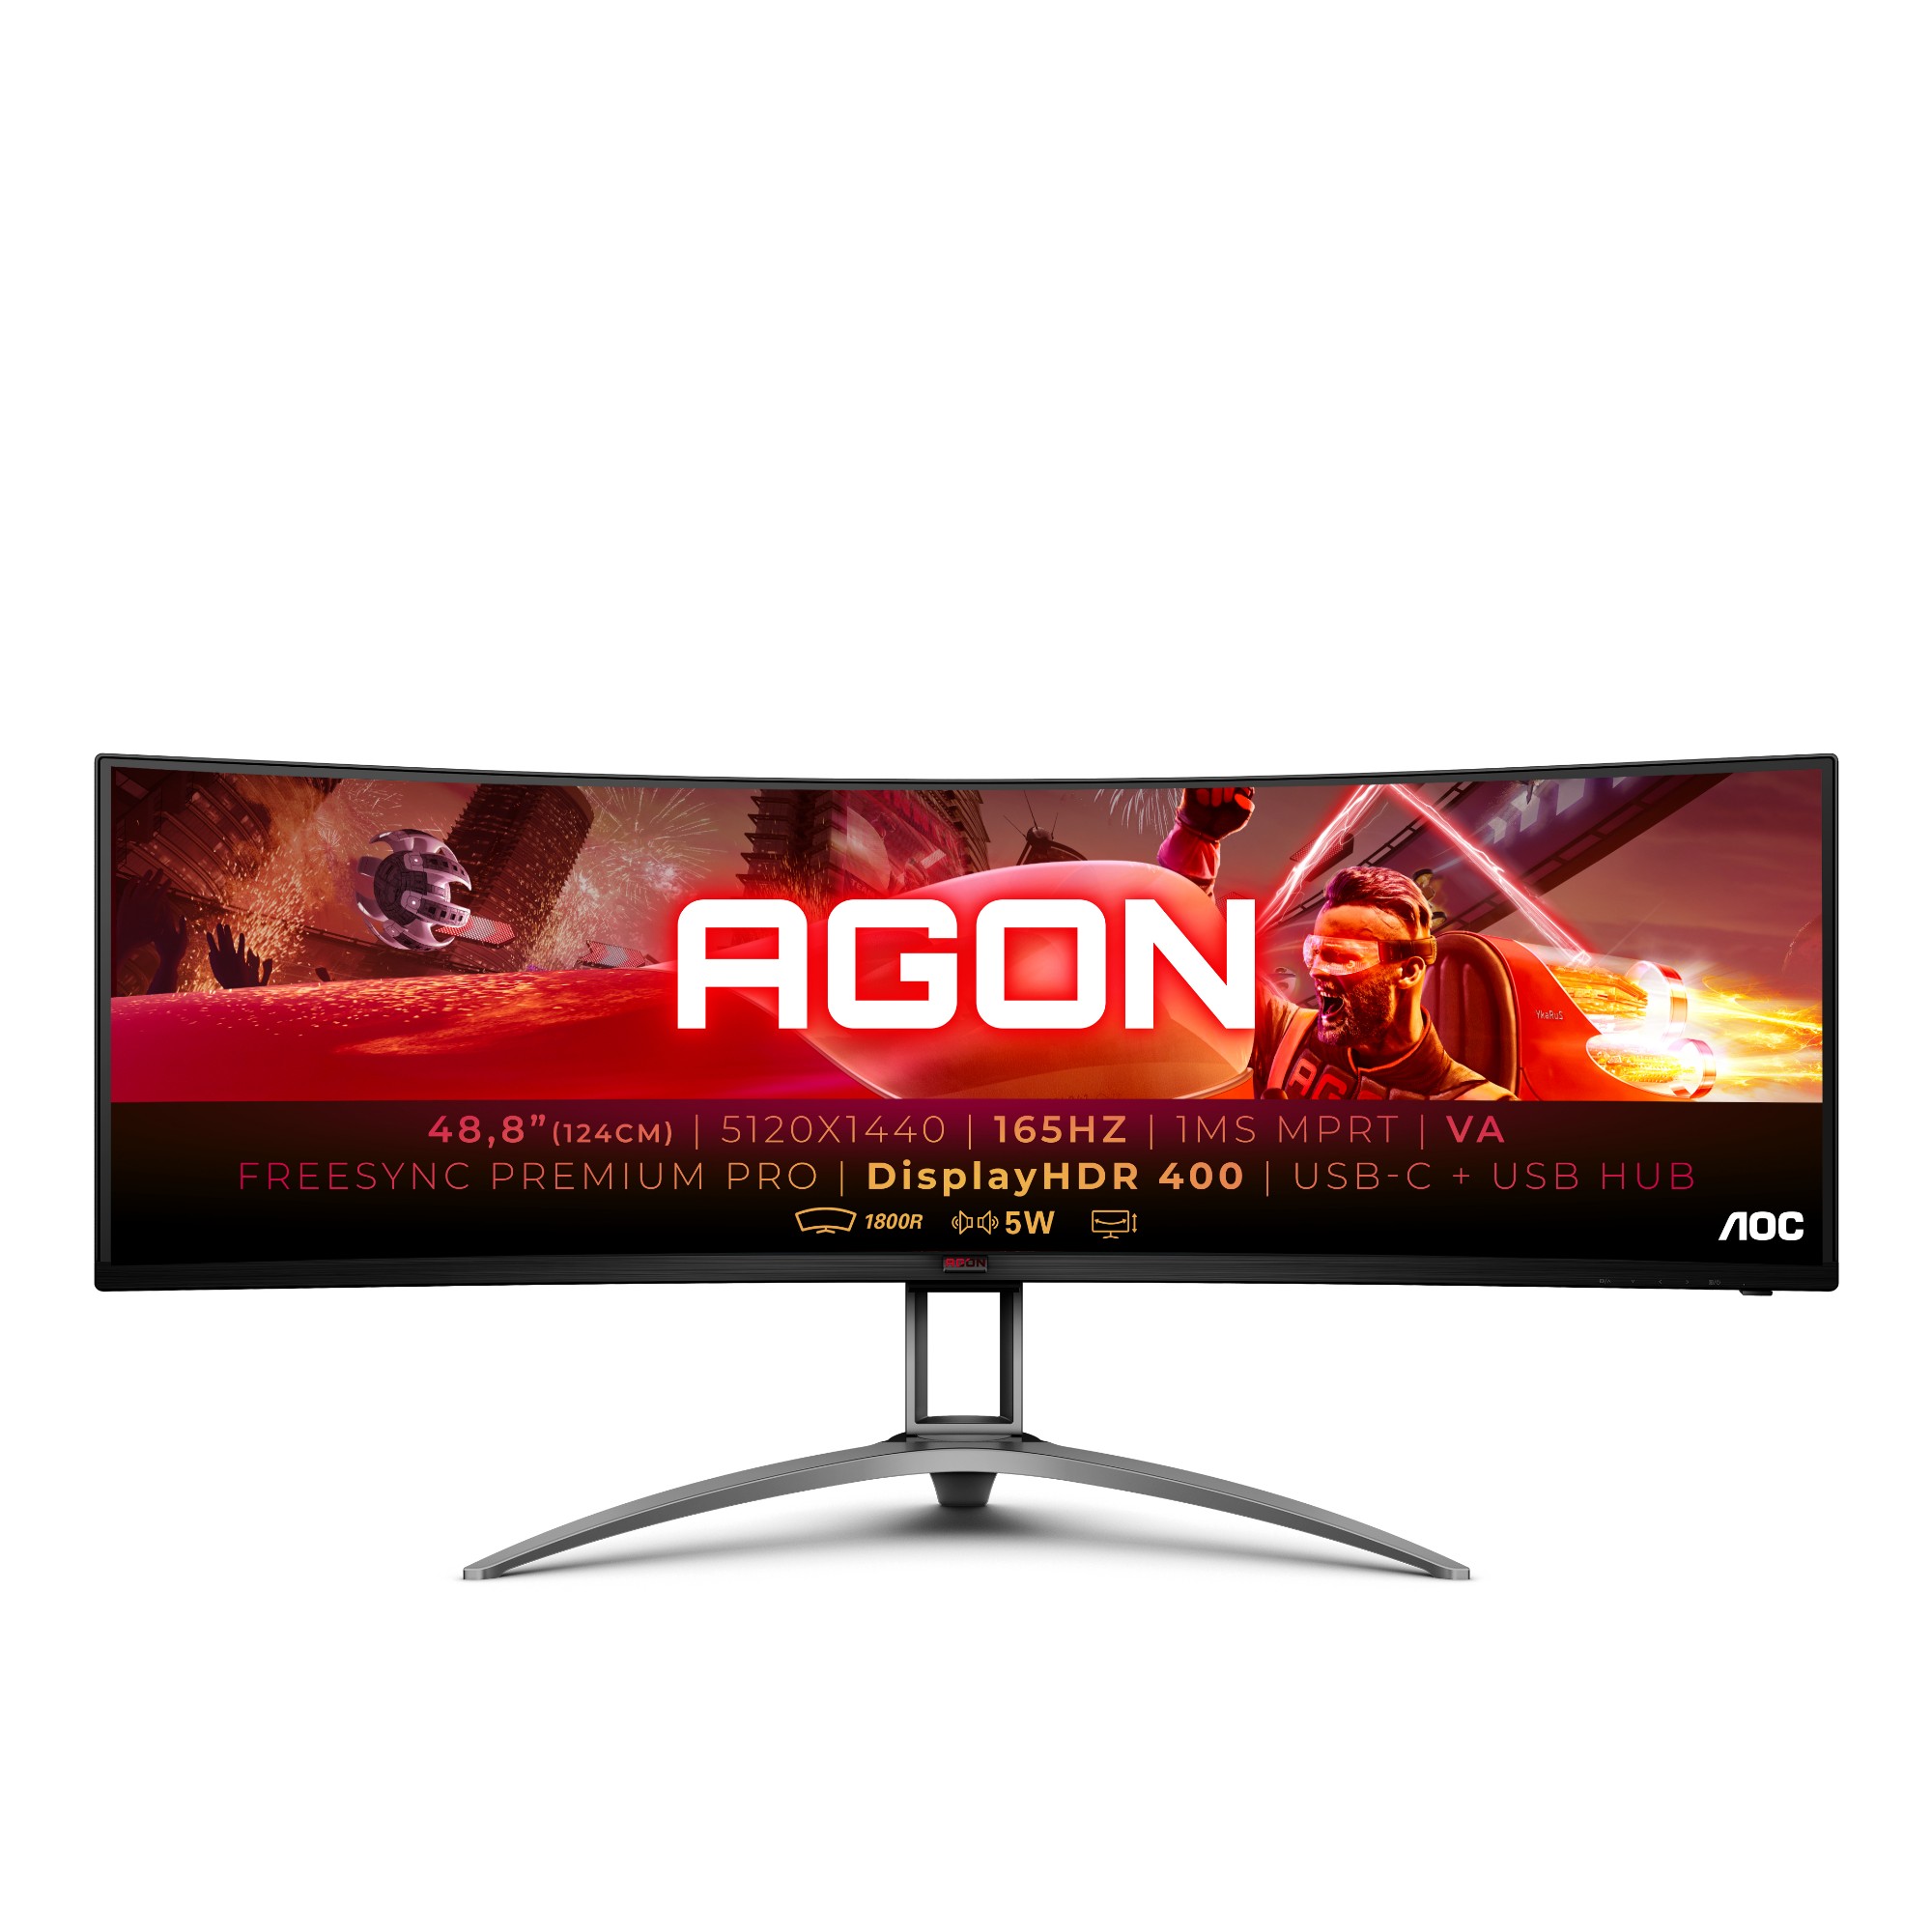 Screen size (inch) 48.8, Panel resolution 5120x1440, Refresh rate 165 Hz, Response time MPRT 1 ms, Panel type VA, USB-C connectivity USB-C 3.2 x 1 (DP alt mode, upstream, power delivery up to 65 W), HDMI HDMI 2.0 x 3, Display Port DisplayPort 1.4 x 1, Syn